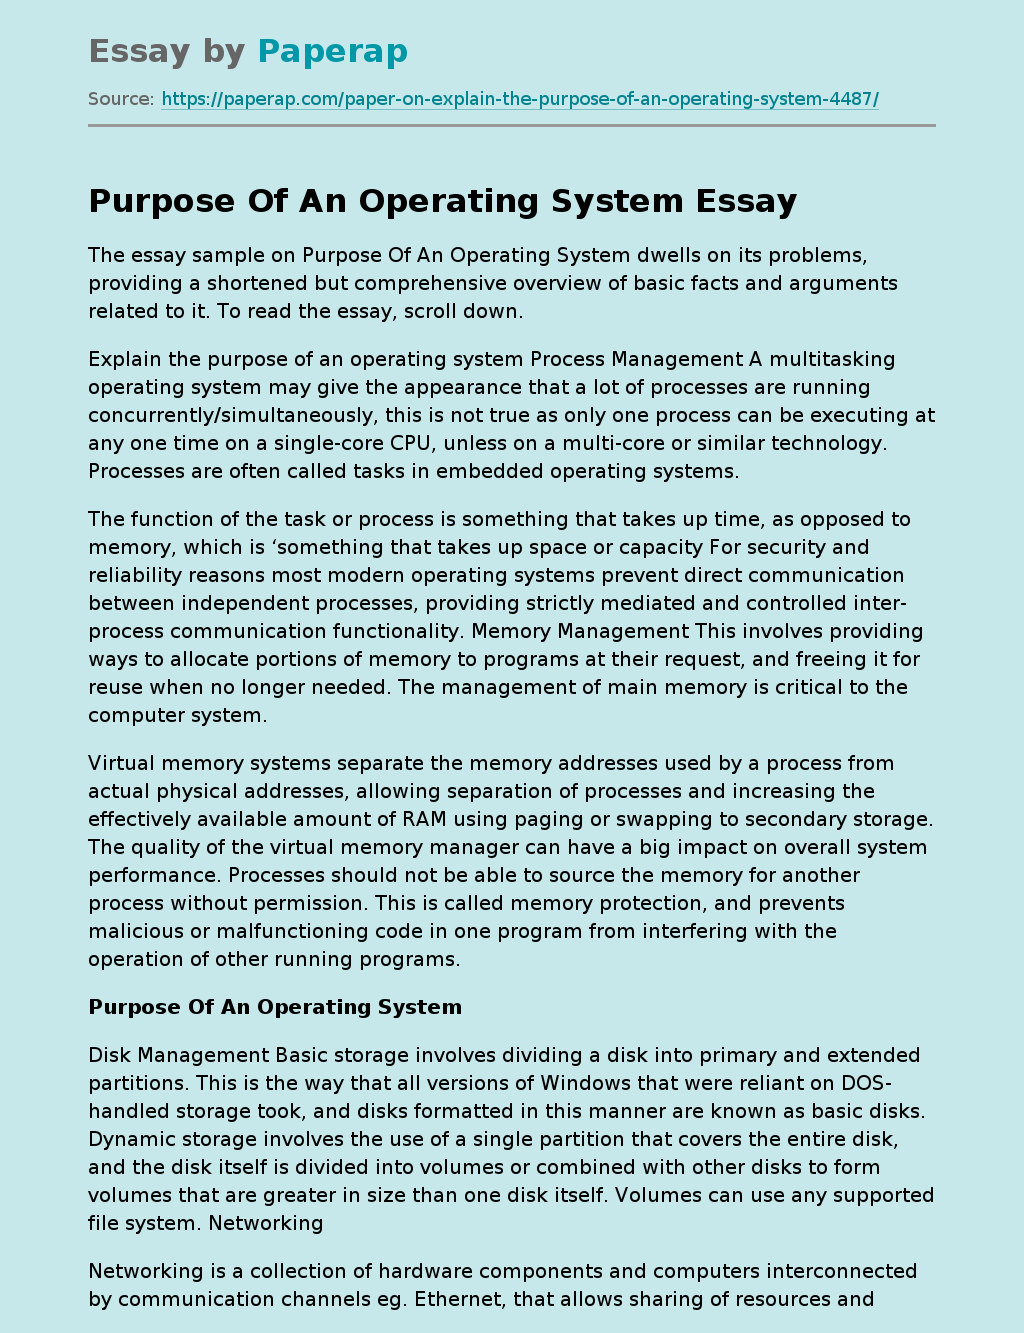 Purpose Of An Operating System